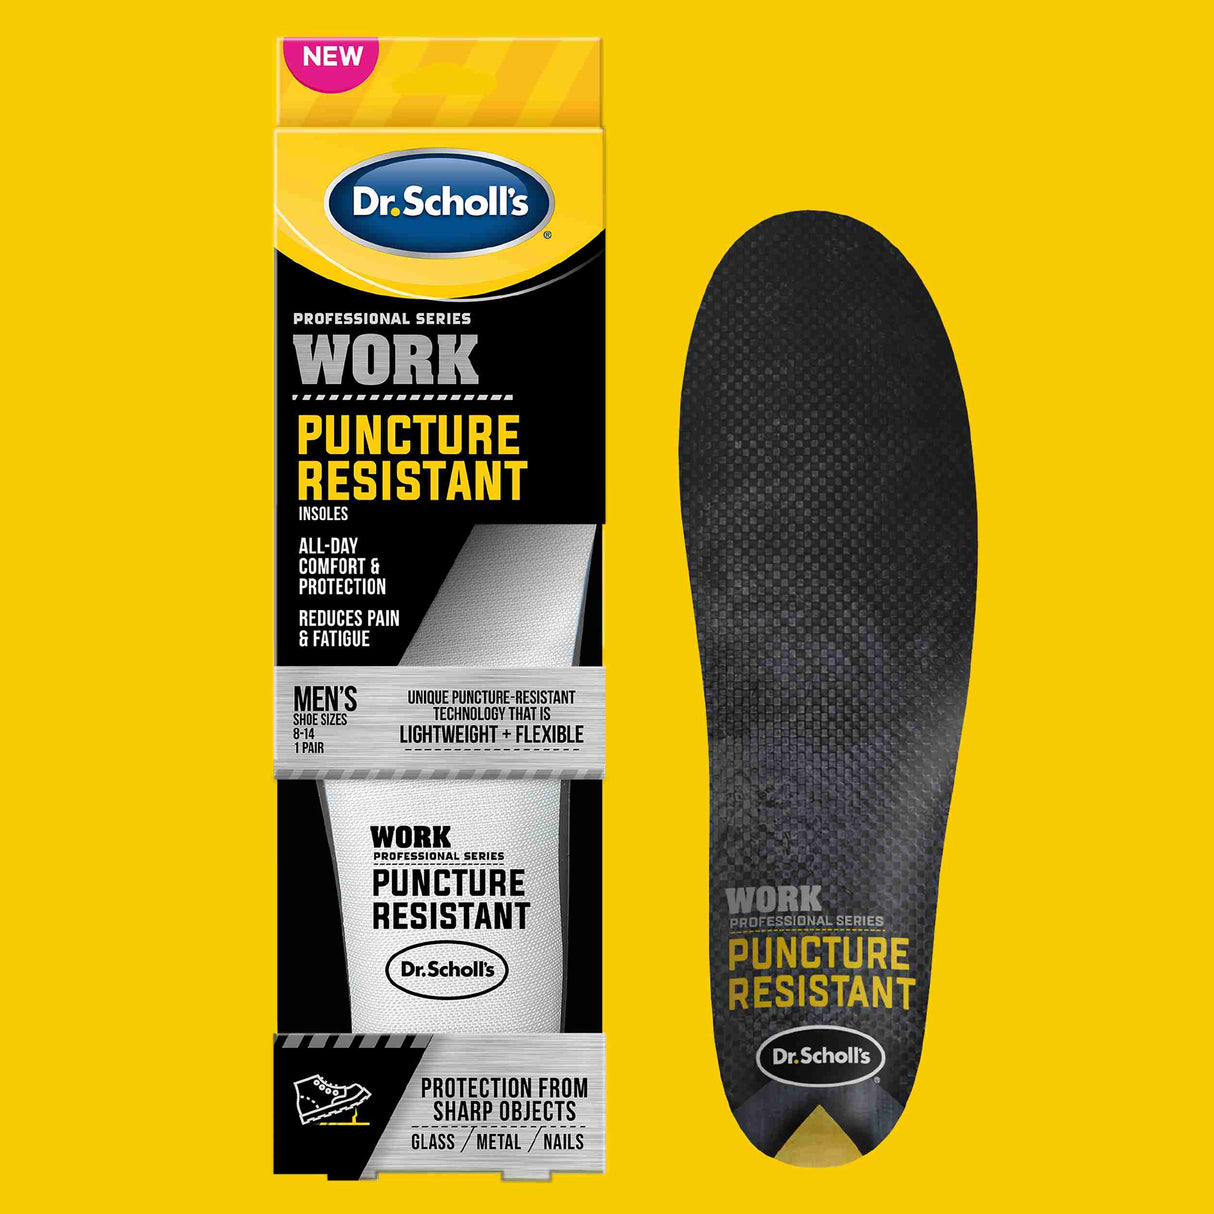 image of puncture resistant insoles in and out of package on yellow background